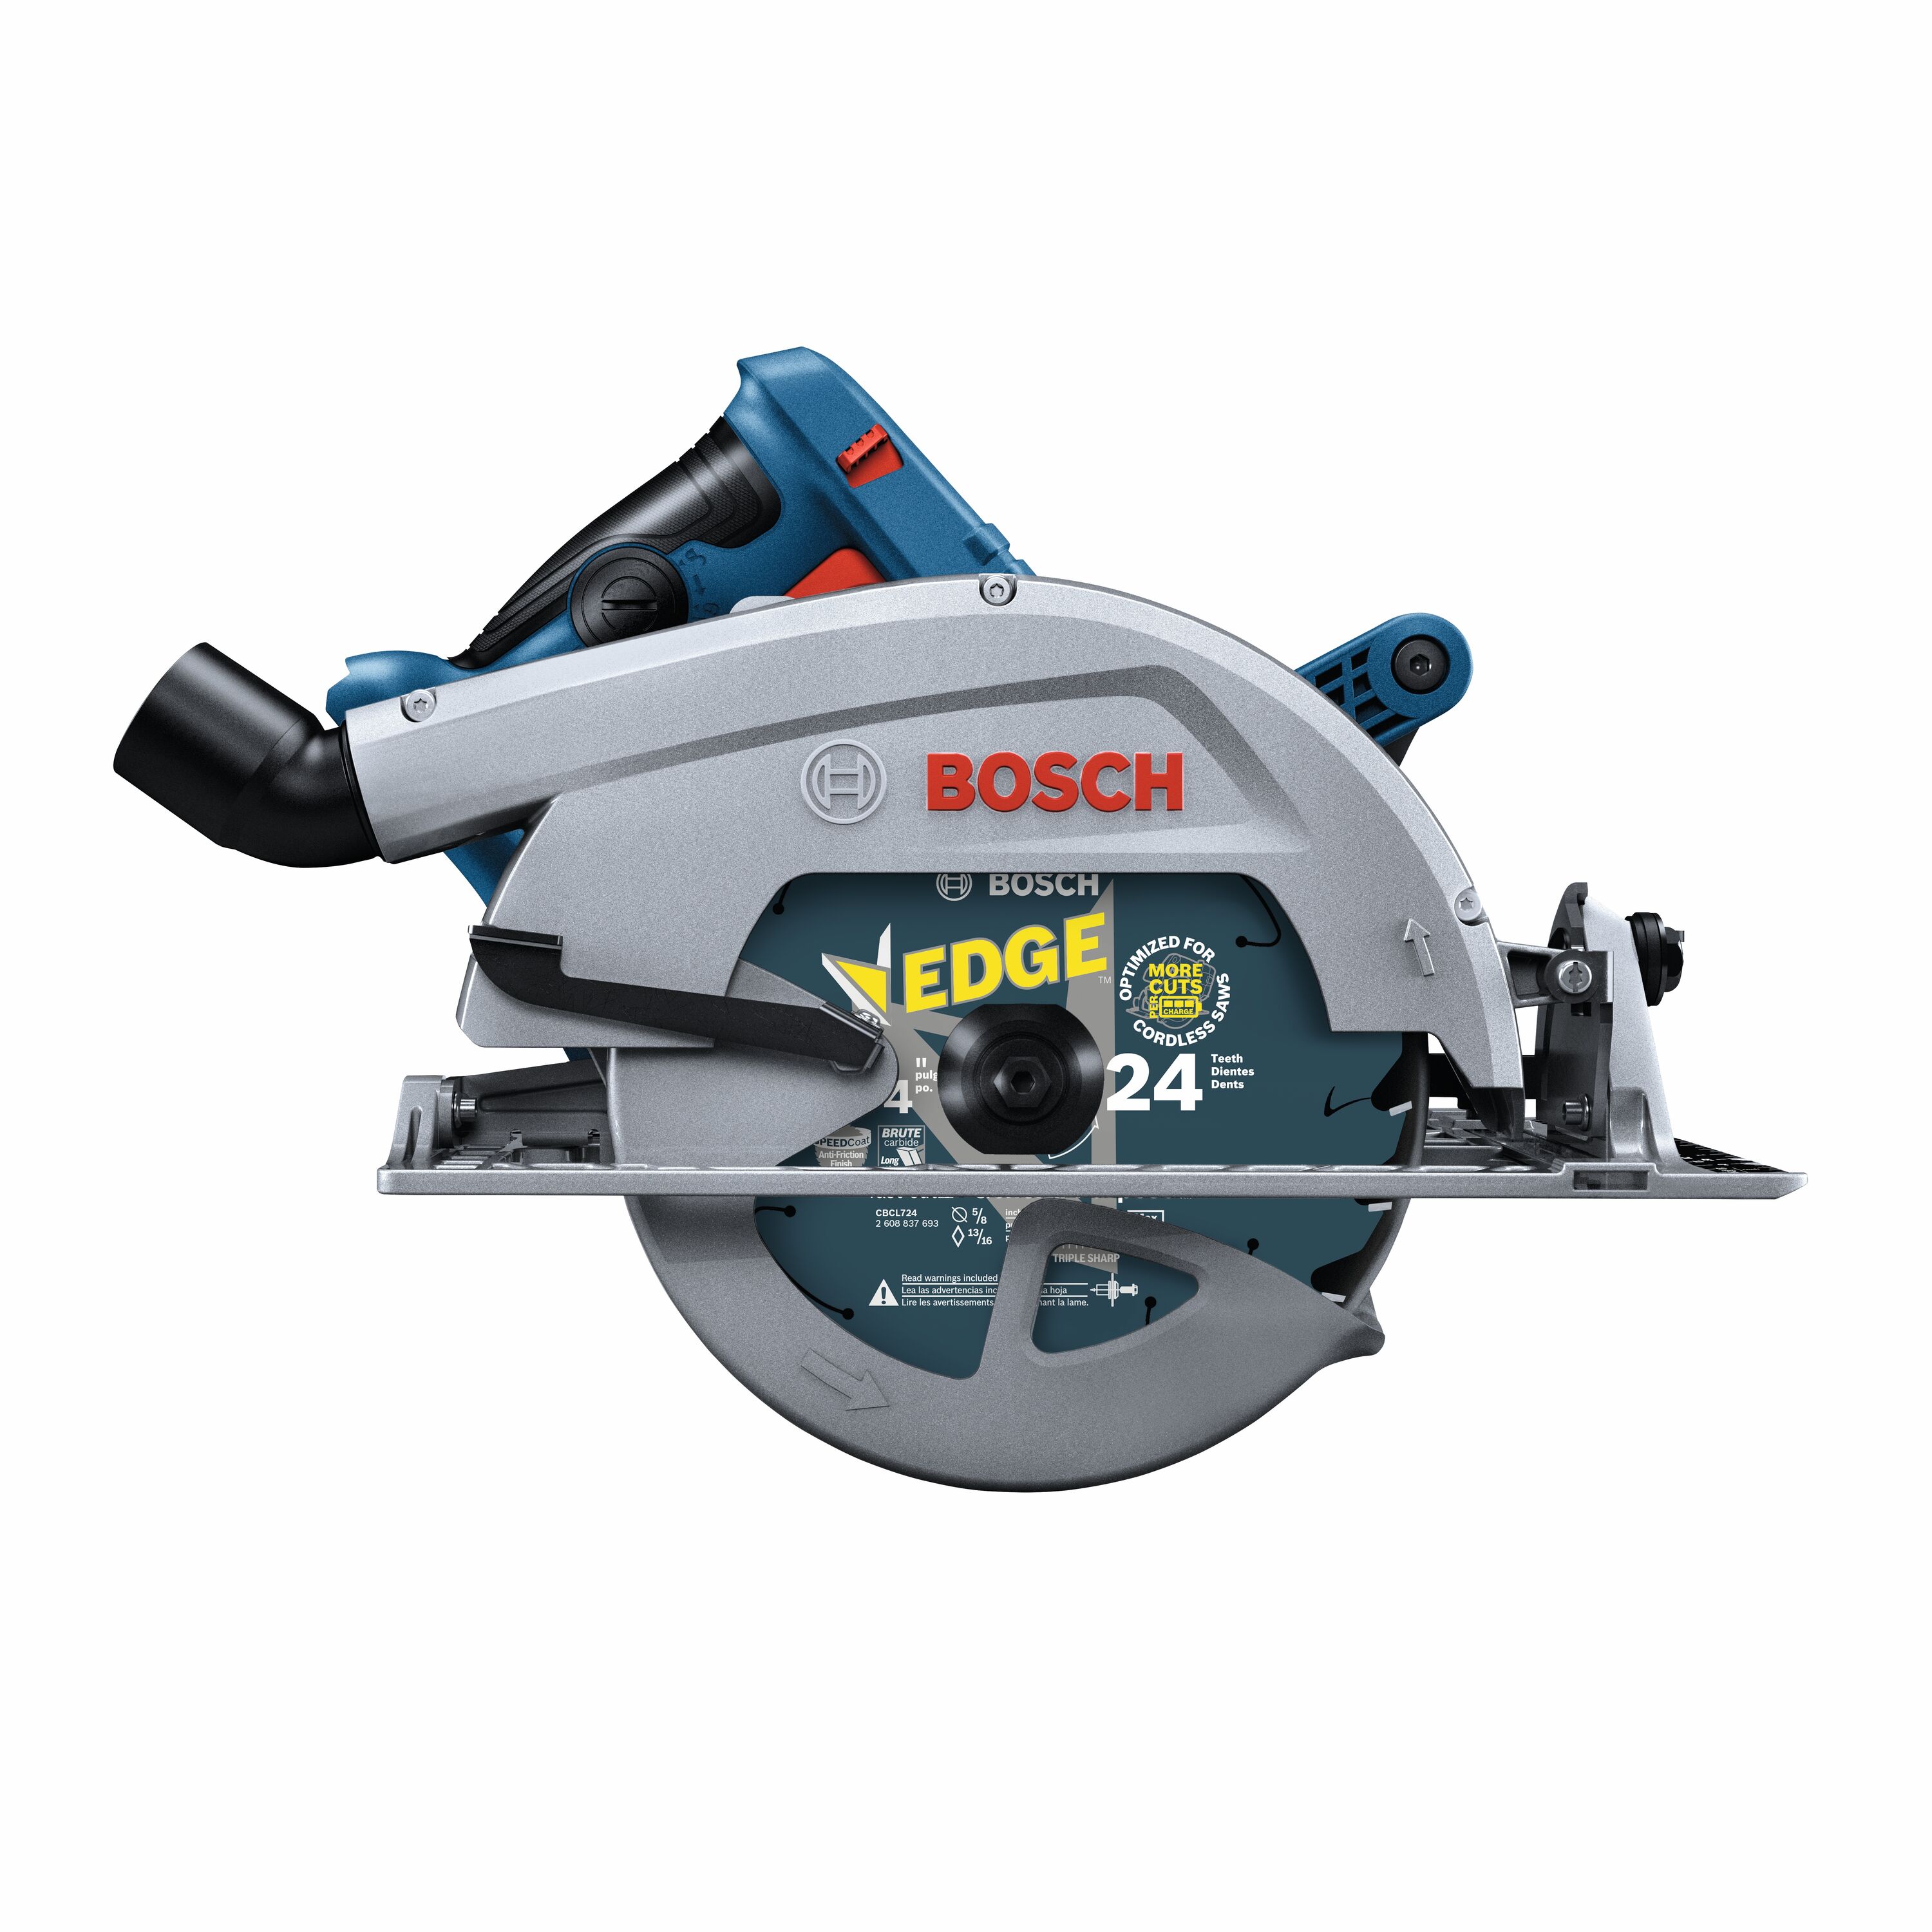 Bosch GardenPump 18 - Coolblue - Before 23:59, delivered tomorrow